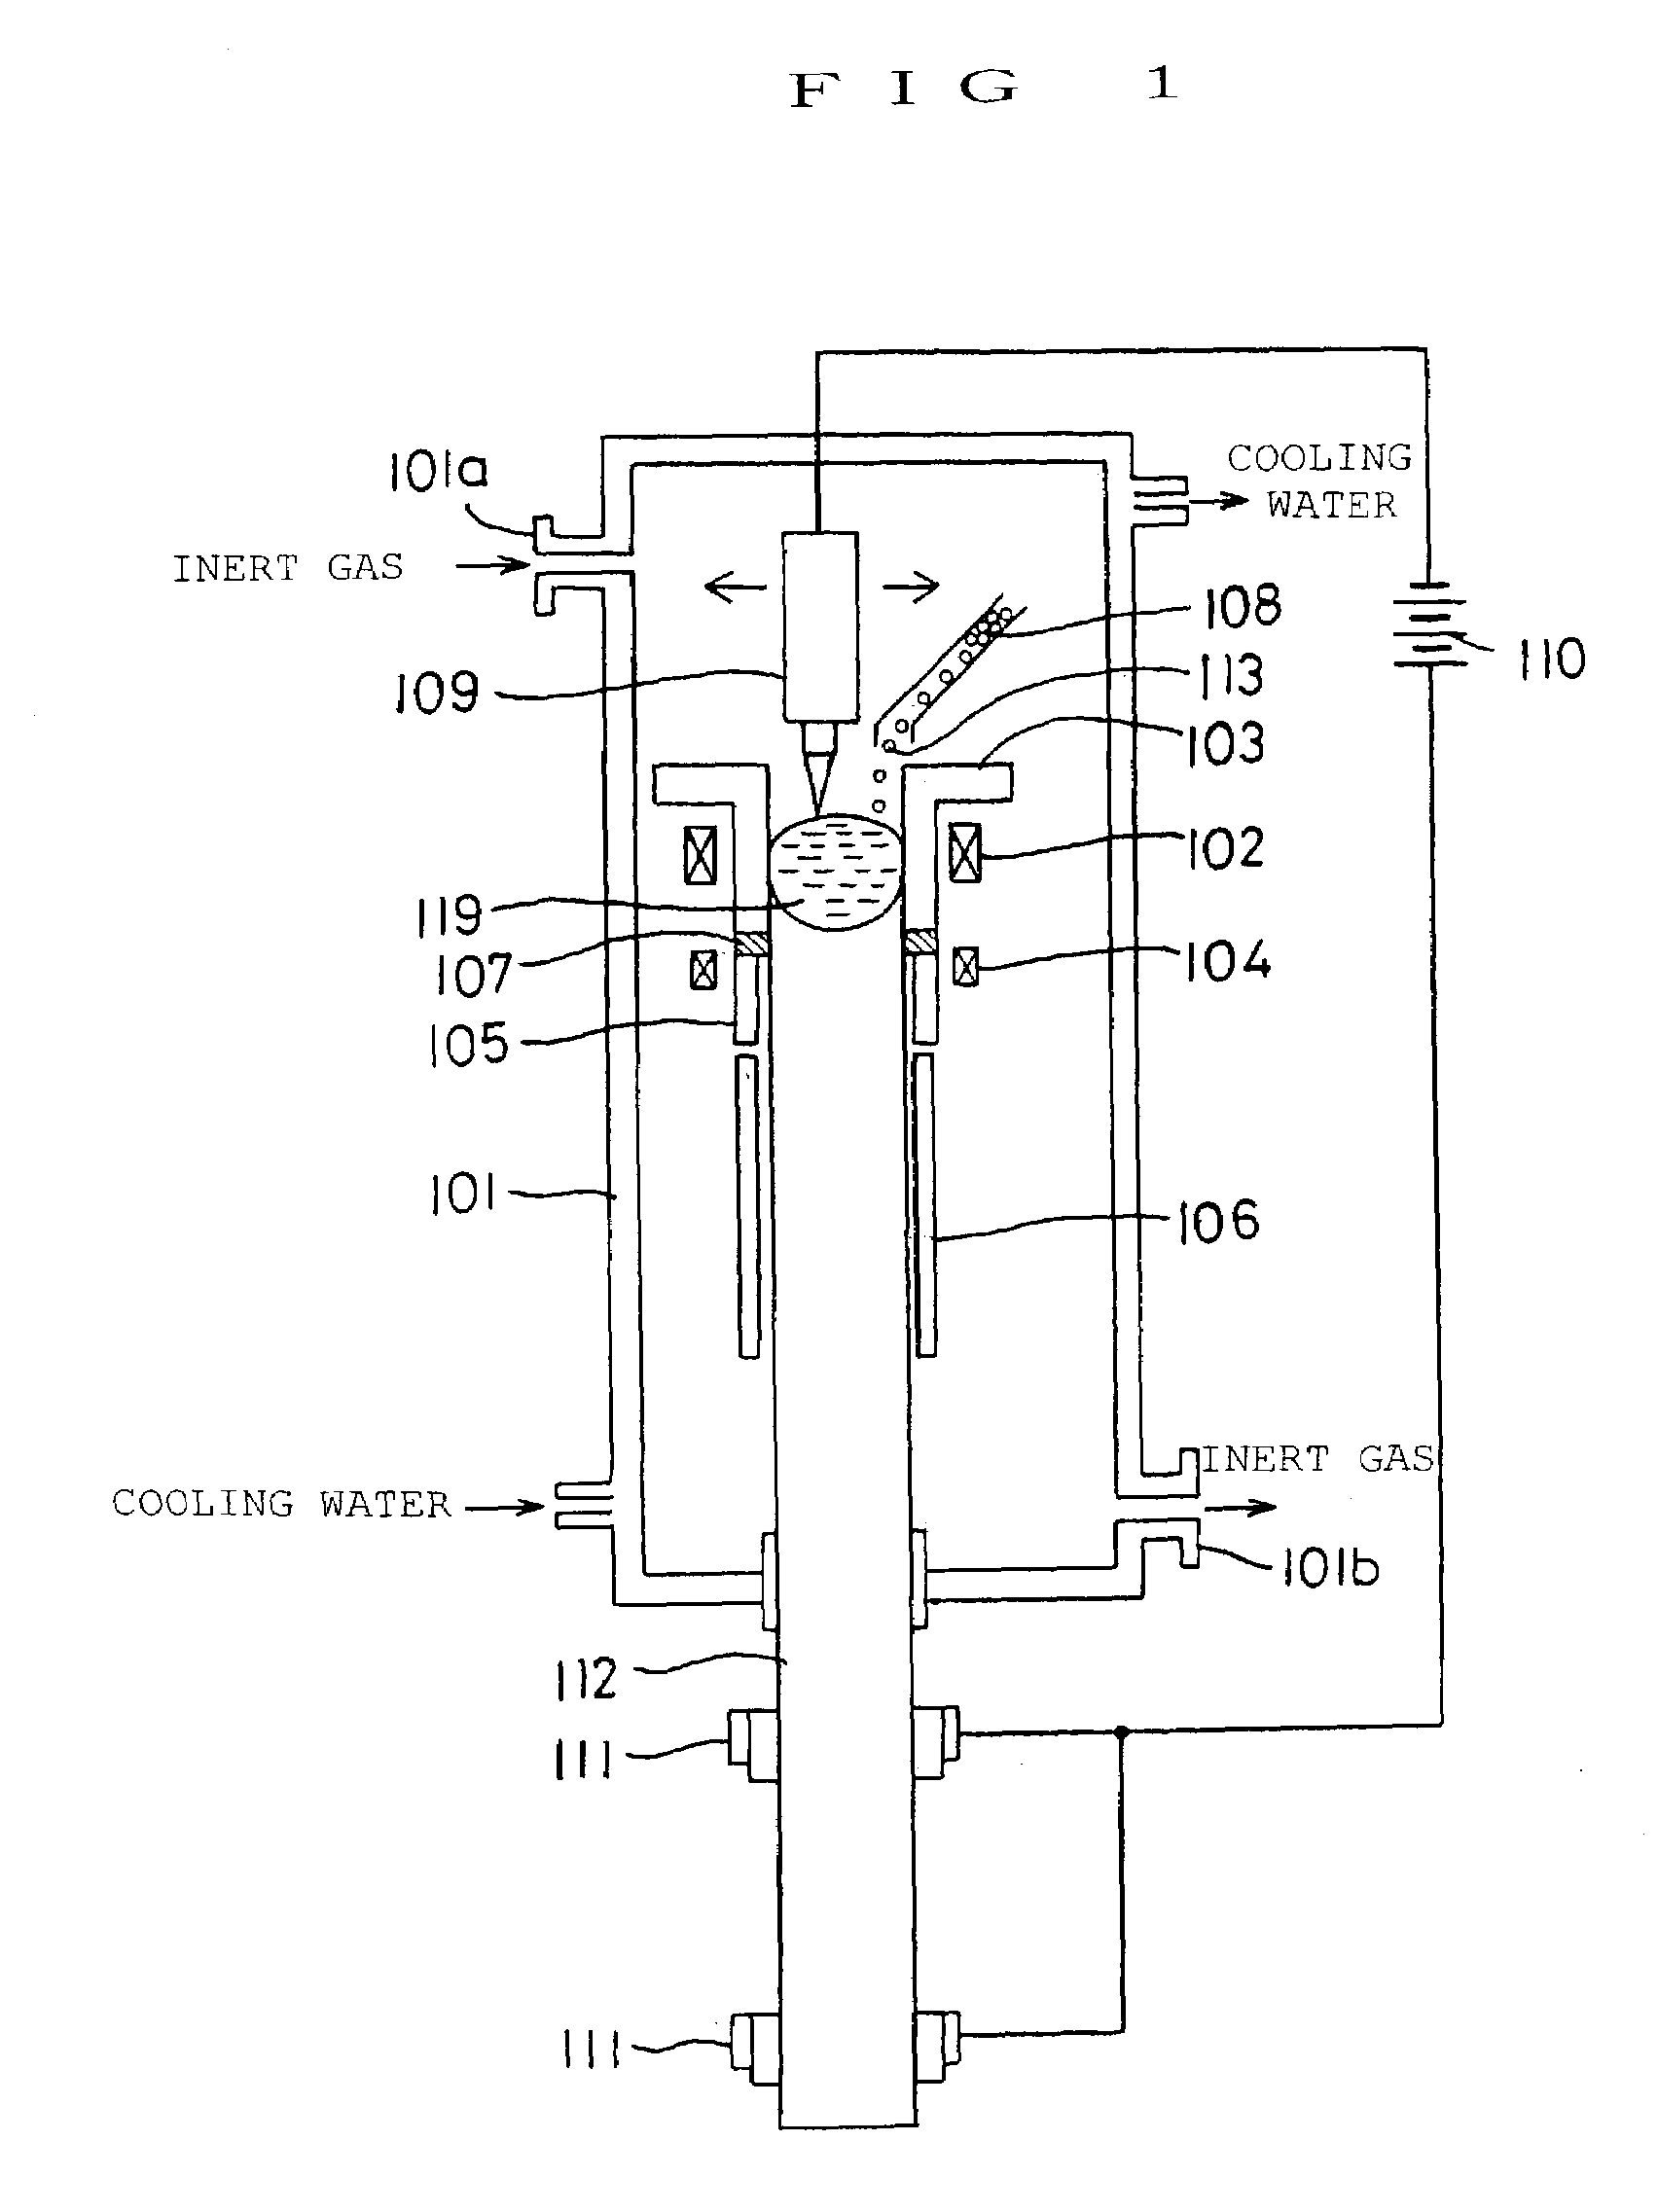 Silicon continuous casting method